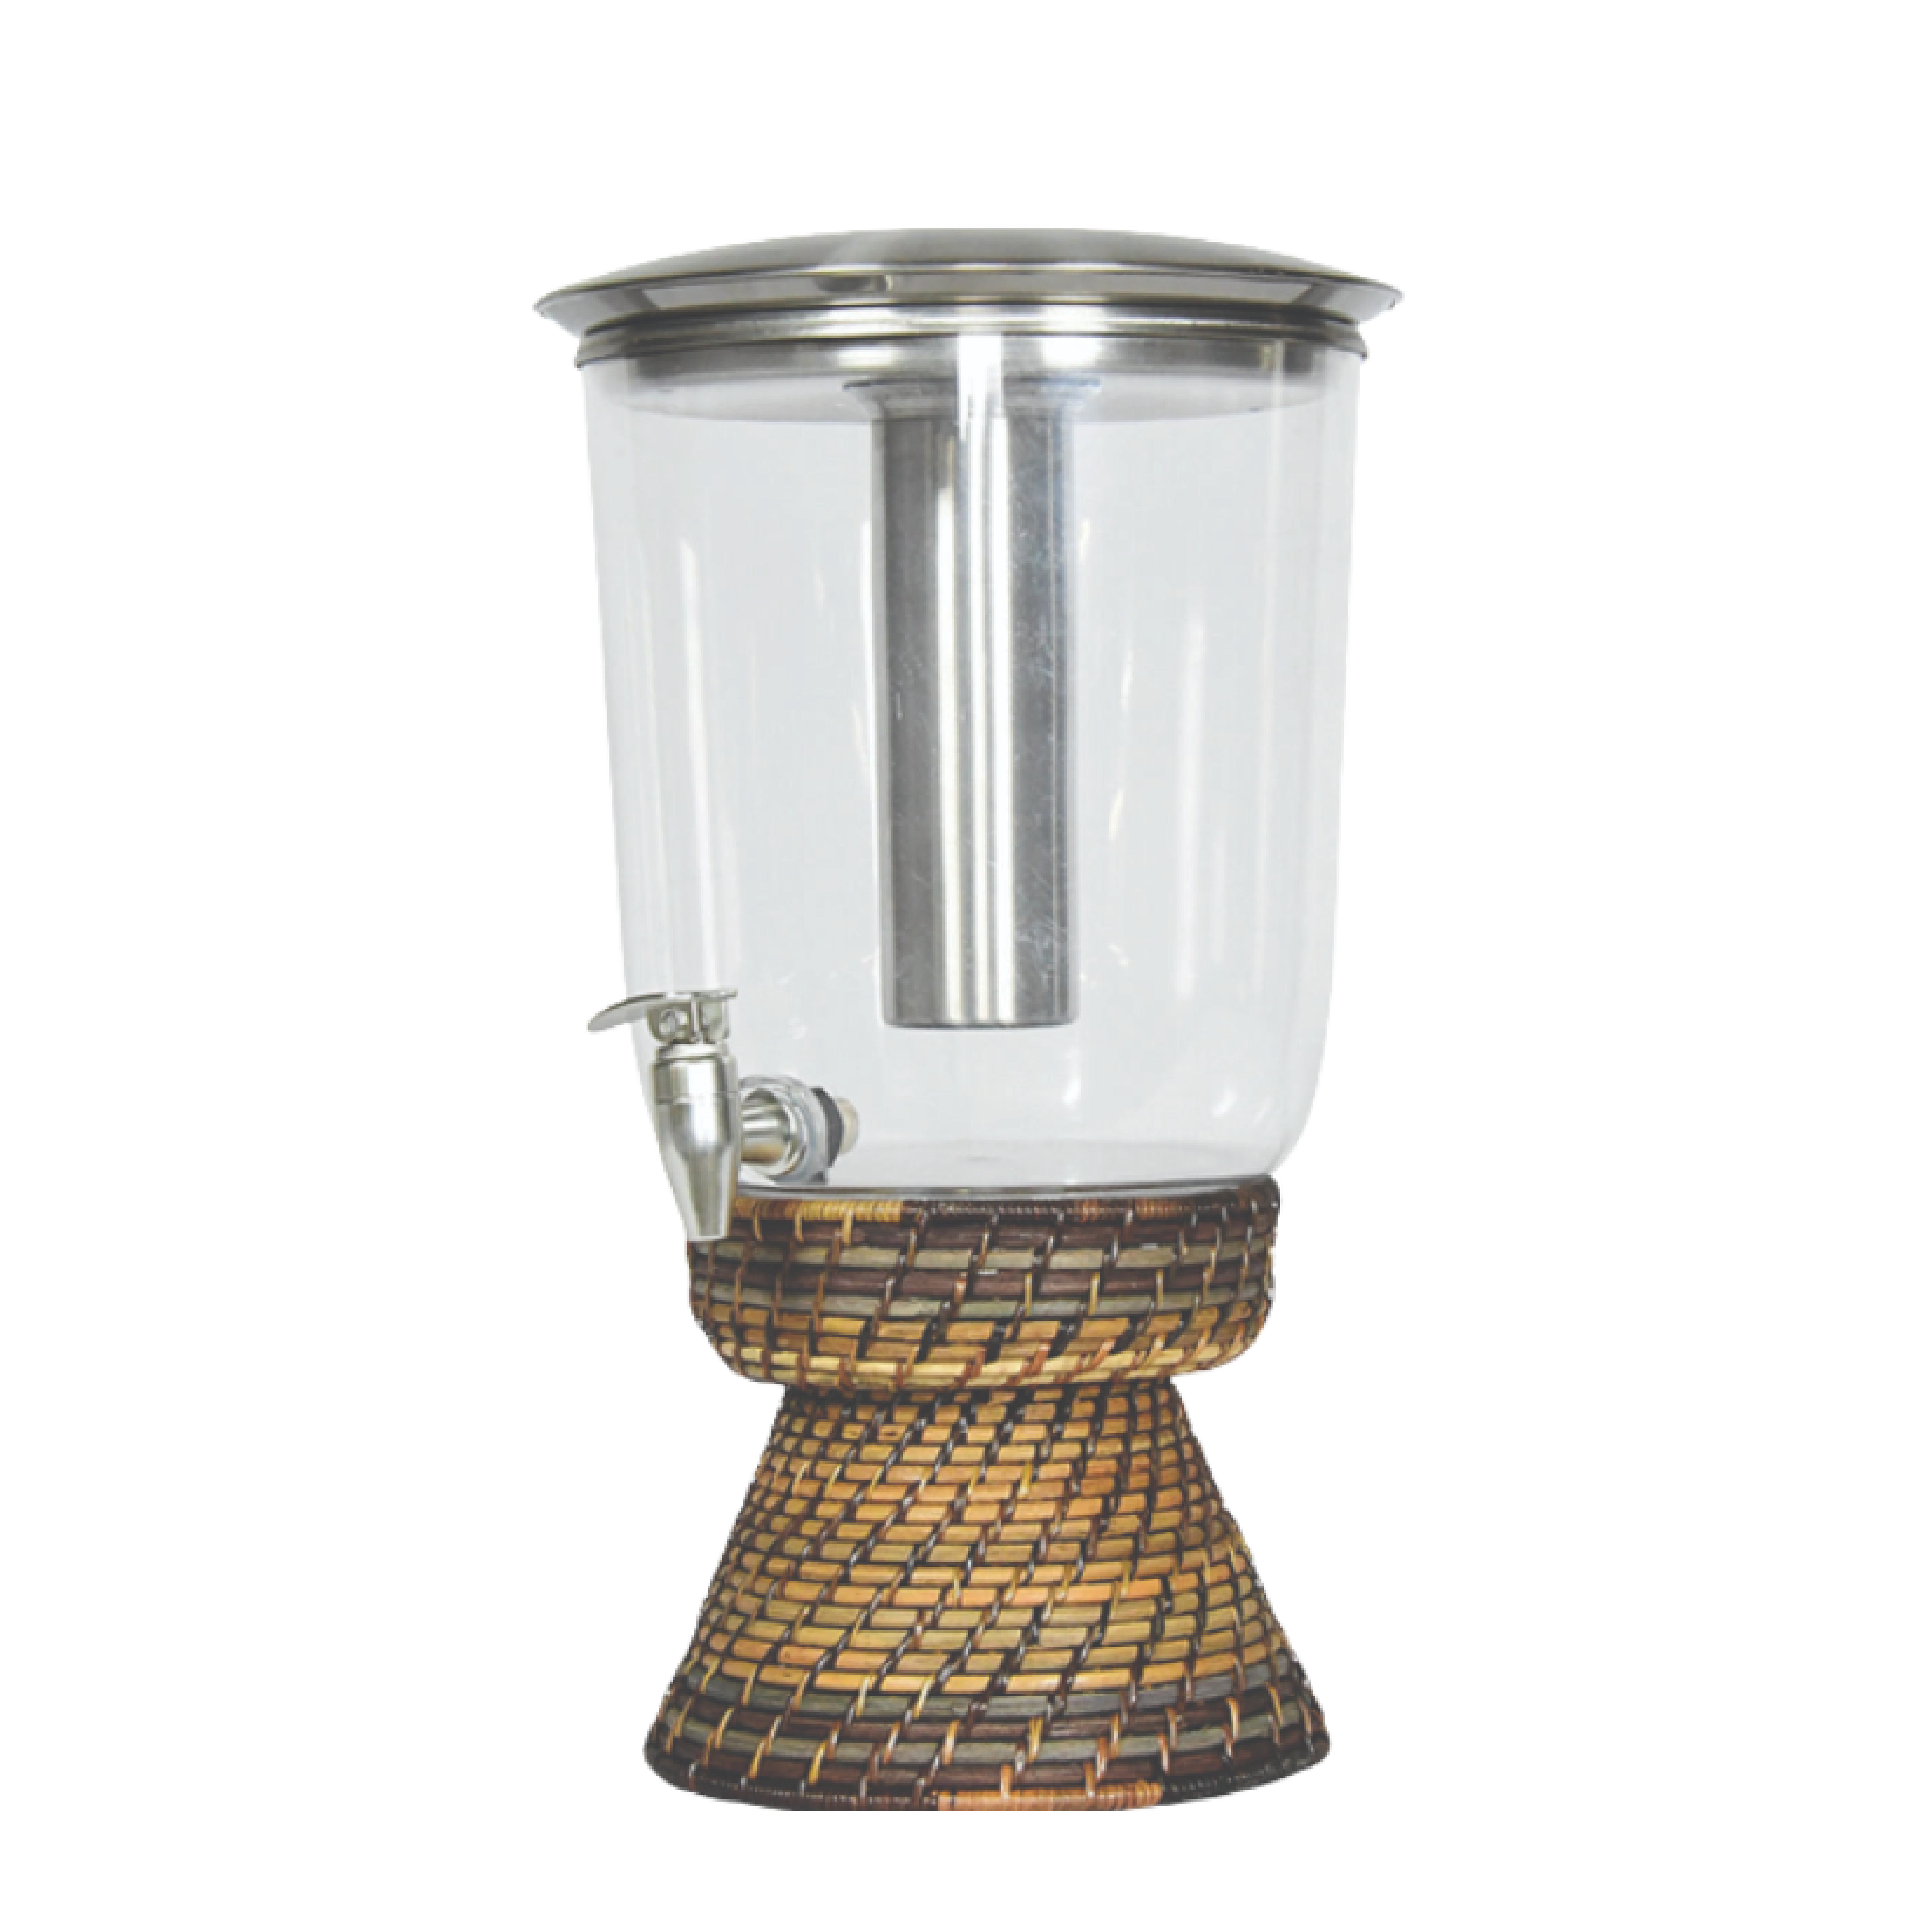 50 cup antique silver coffee urn Rentals Nashville TN, Where to rent 50 cup  antique silver coffee urn in Greater Middle Tennessee